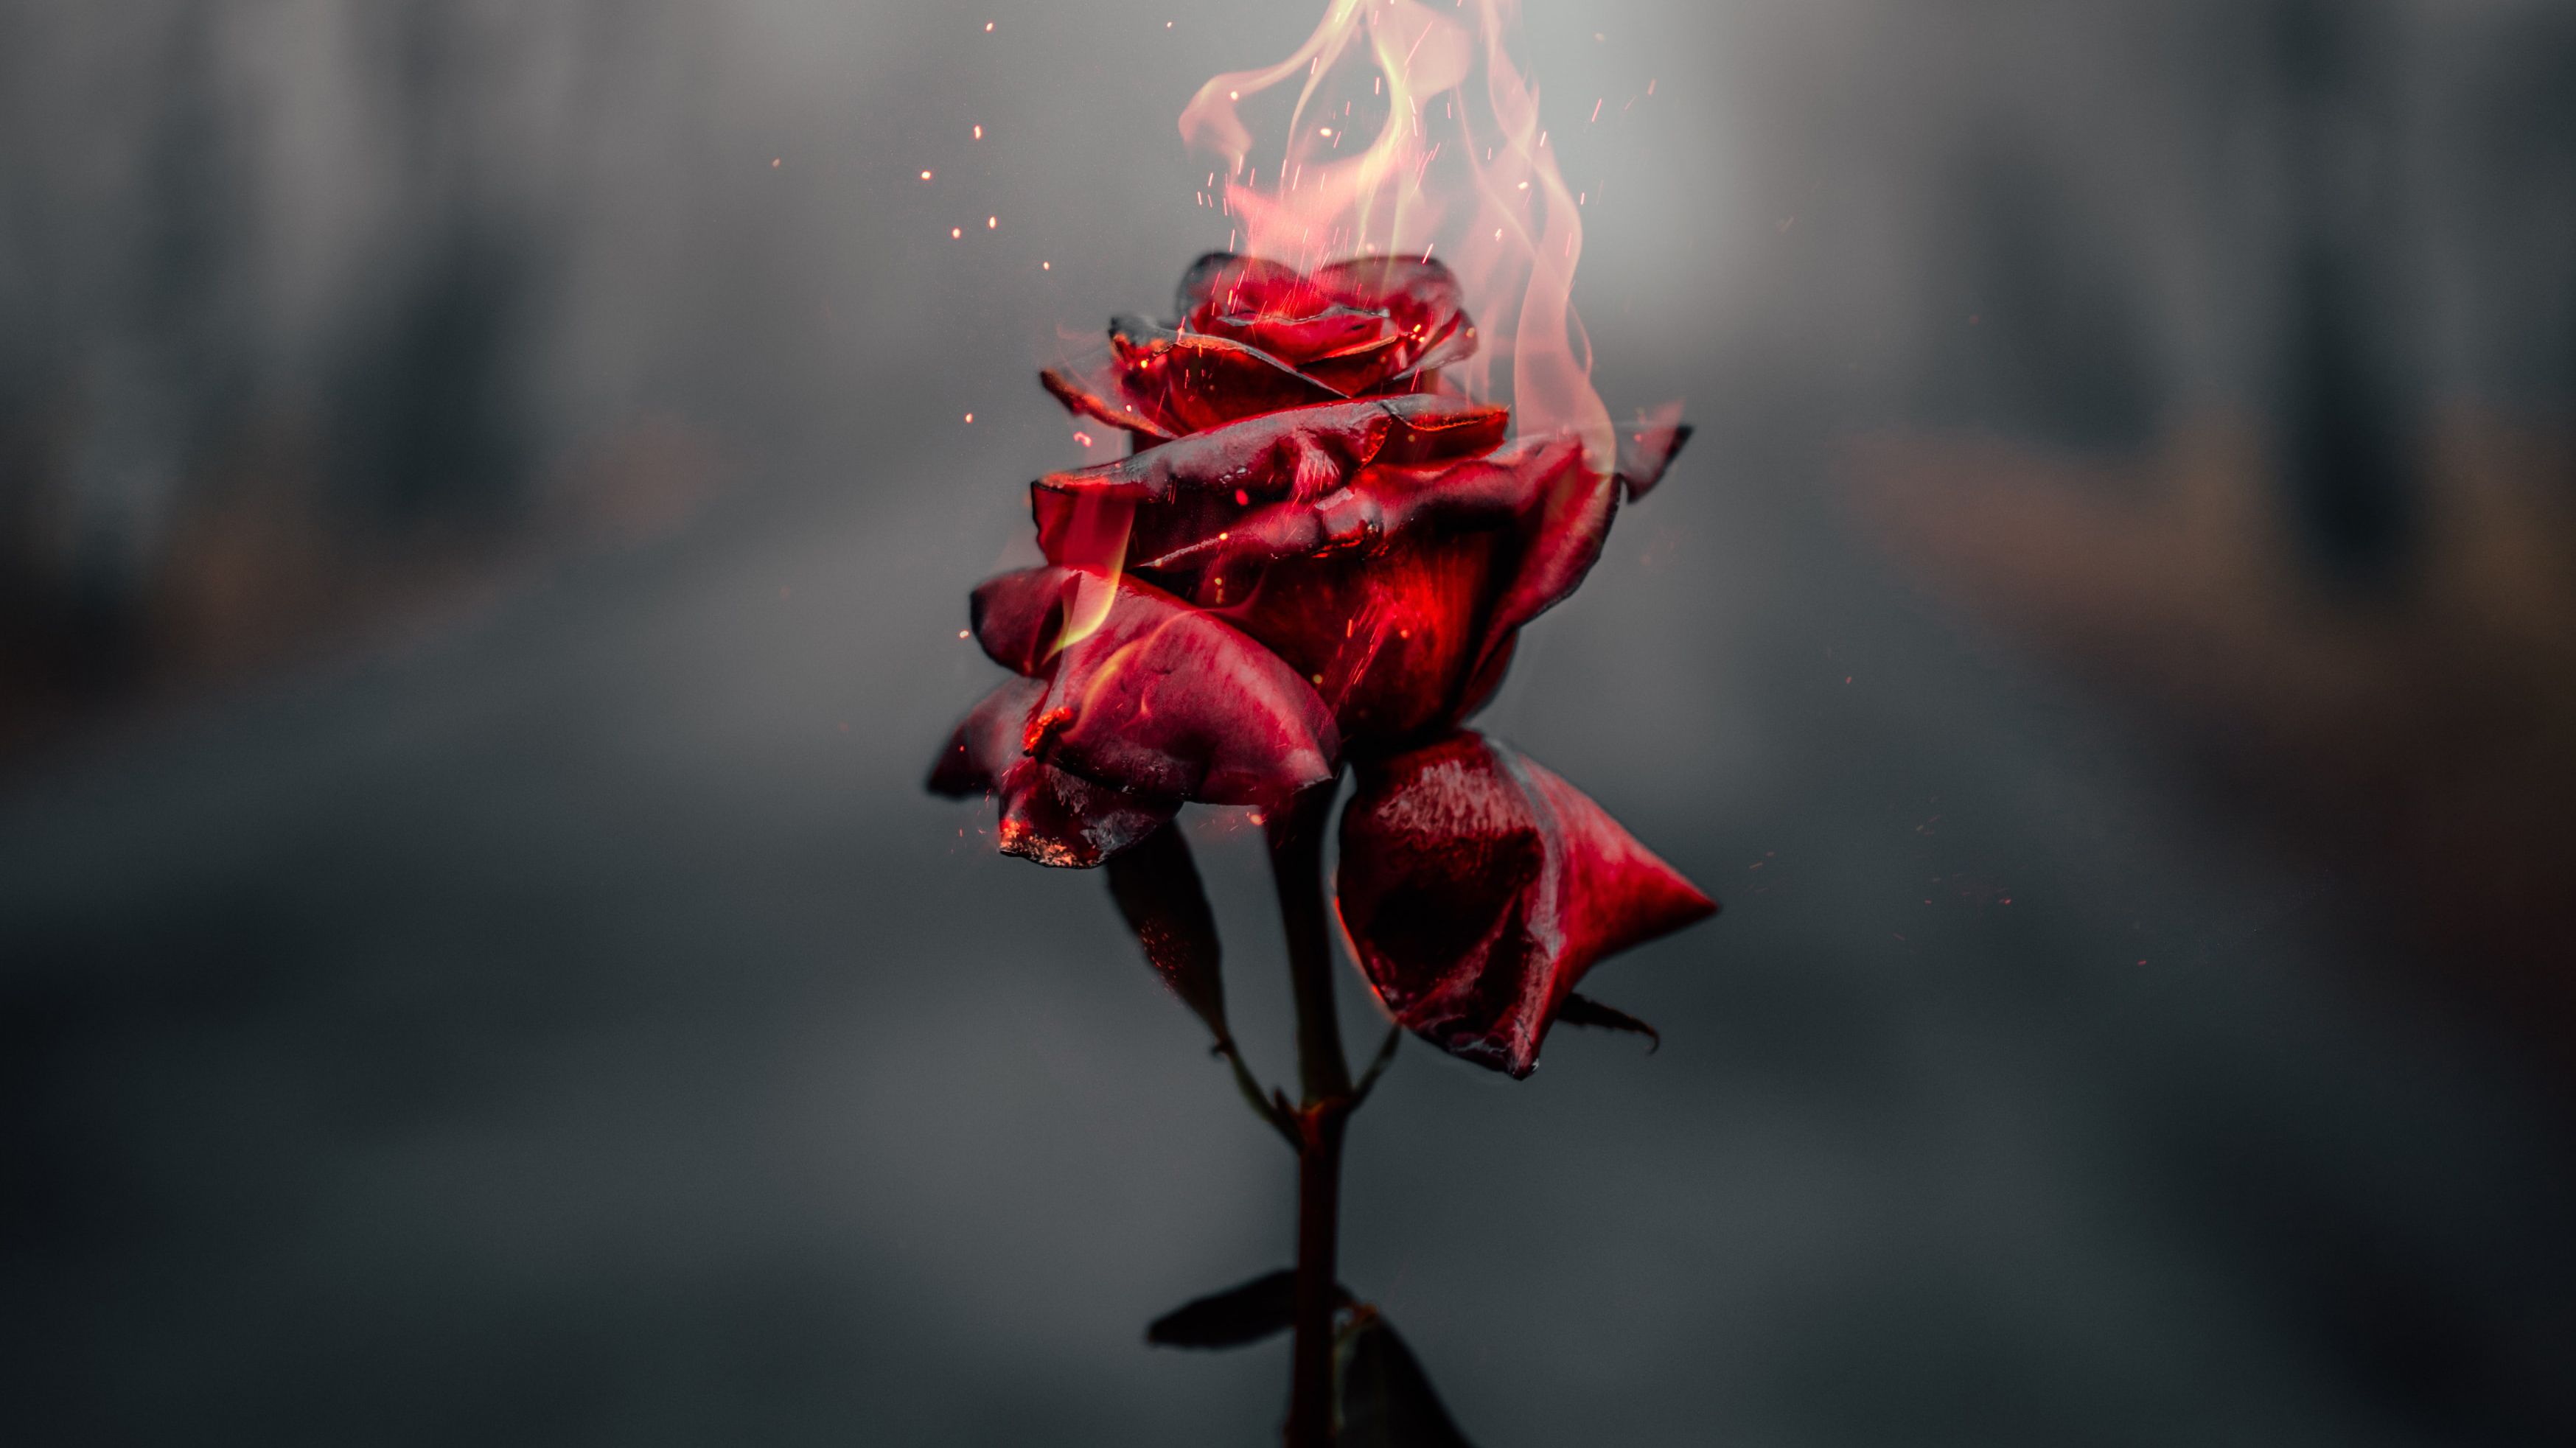 Burning Rose 4k, HD Photography, 4k Wallpaper, Image, Background, Photo and Picture